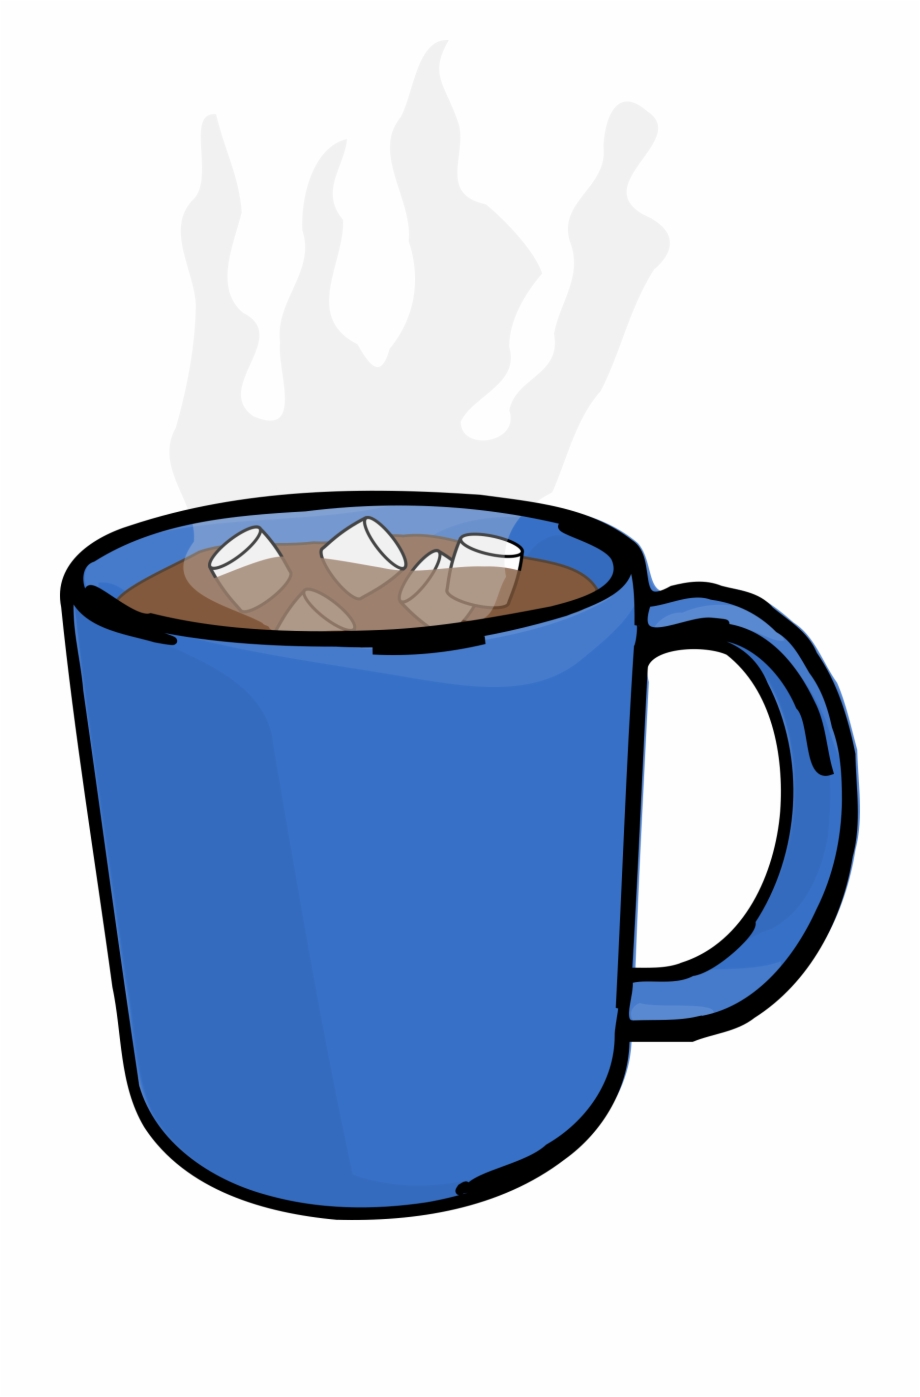 Picture #2575654 - cup clipart hot chocolate mug. cup clipart hot choco...